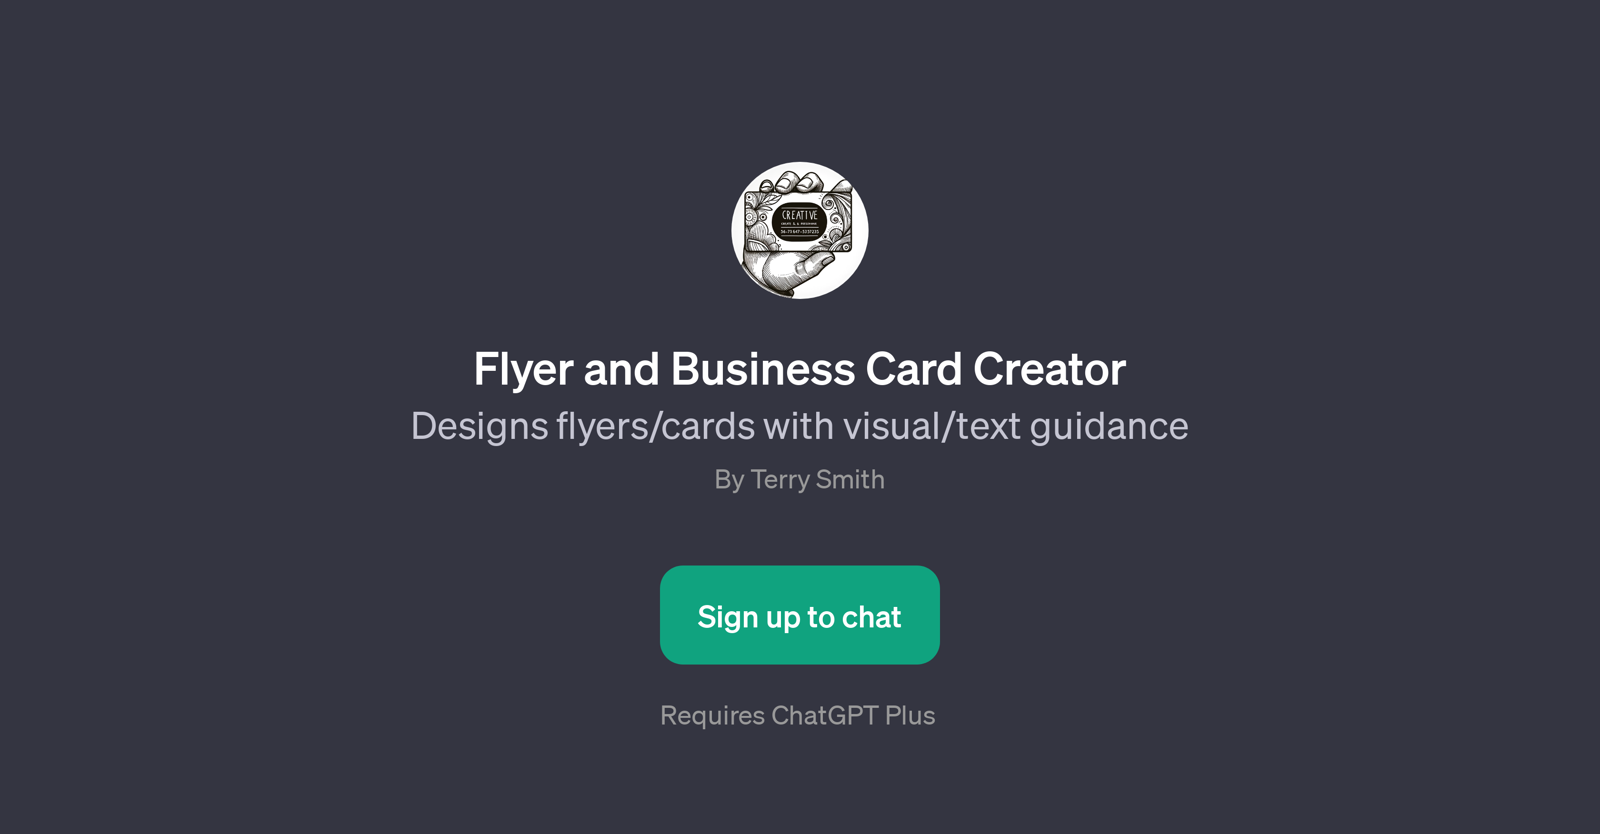 Flyer and Business Card Creator website